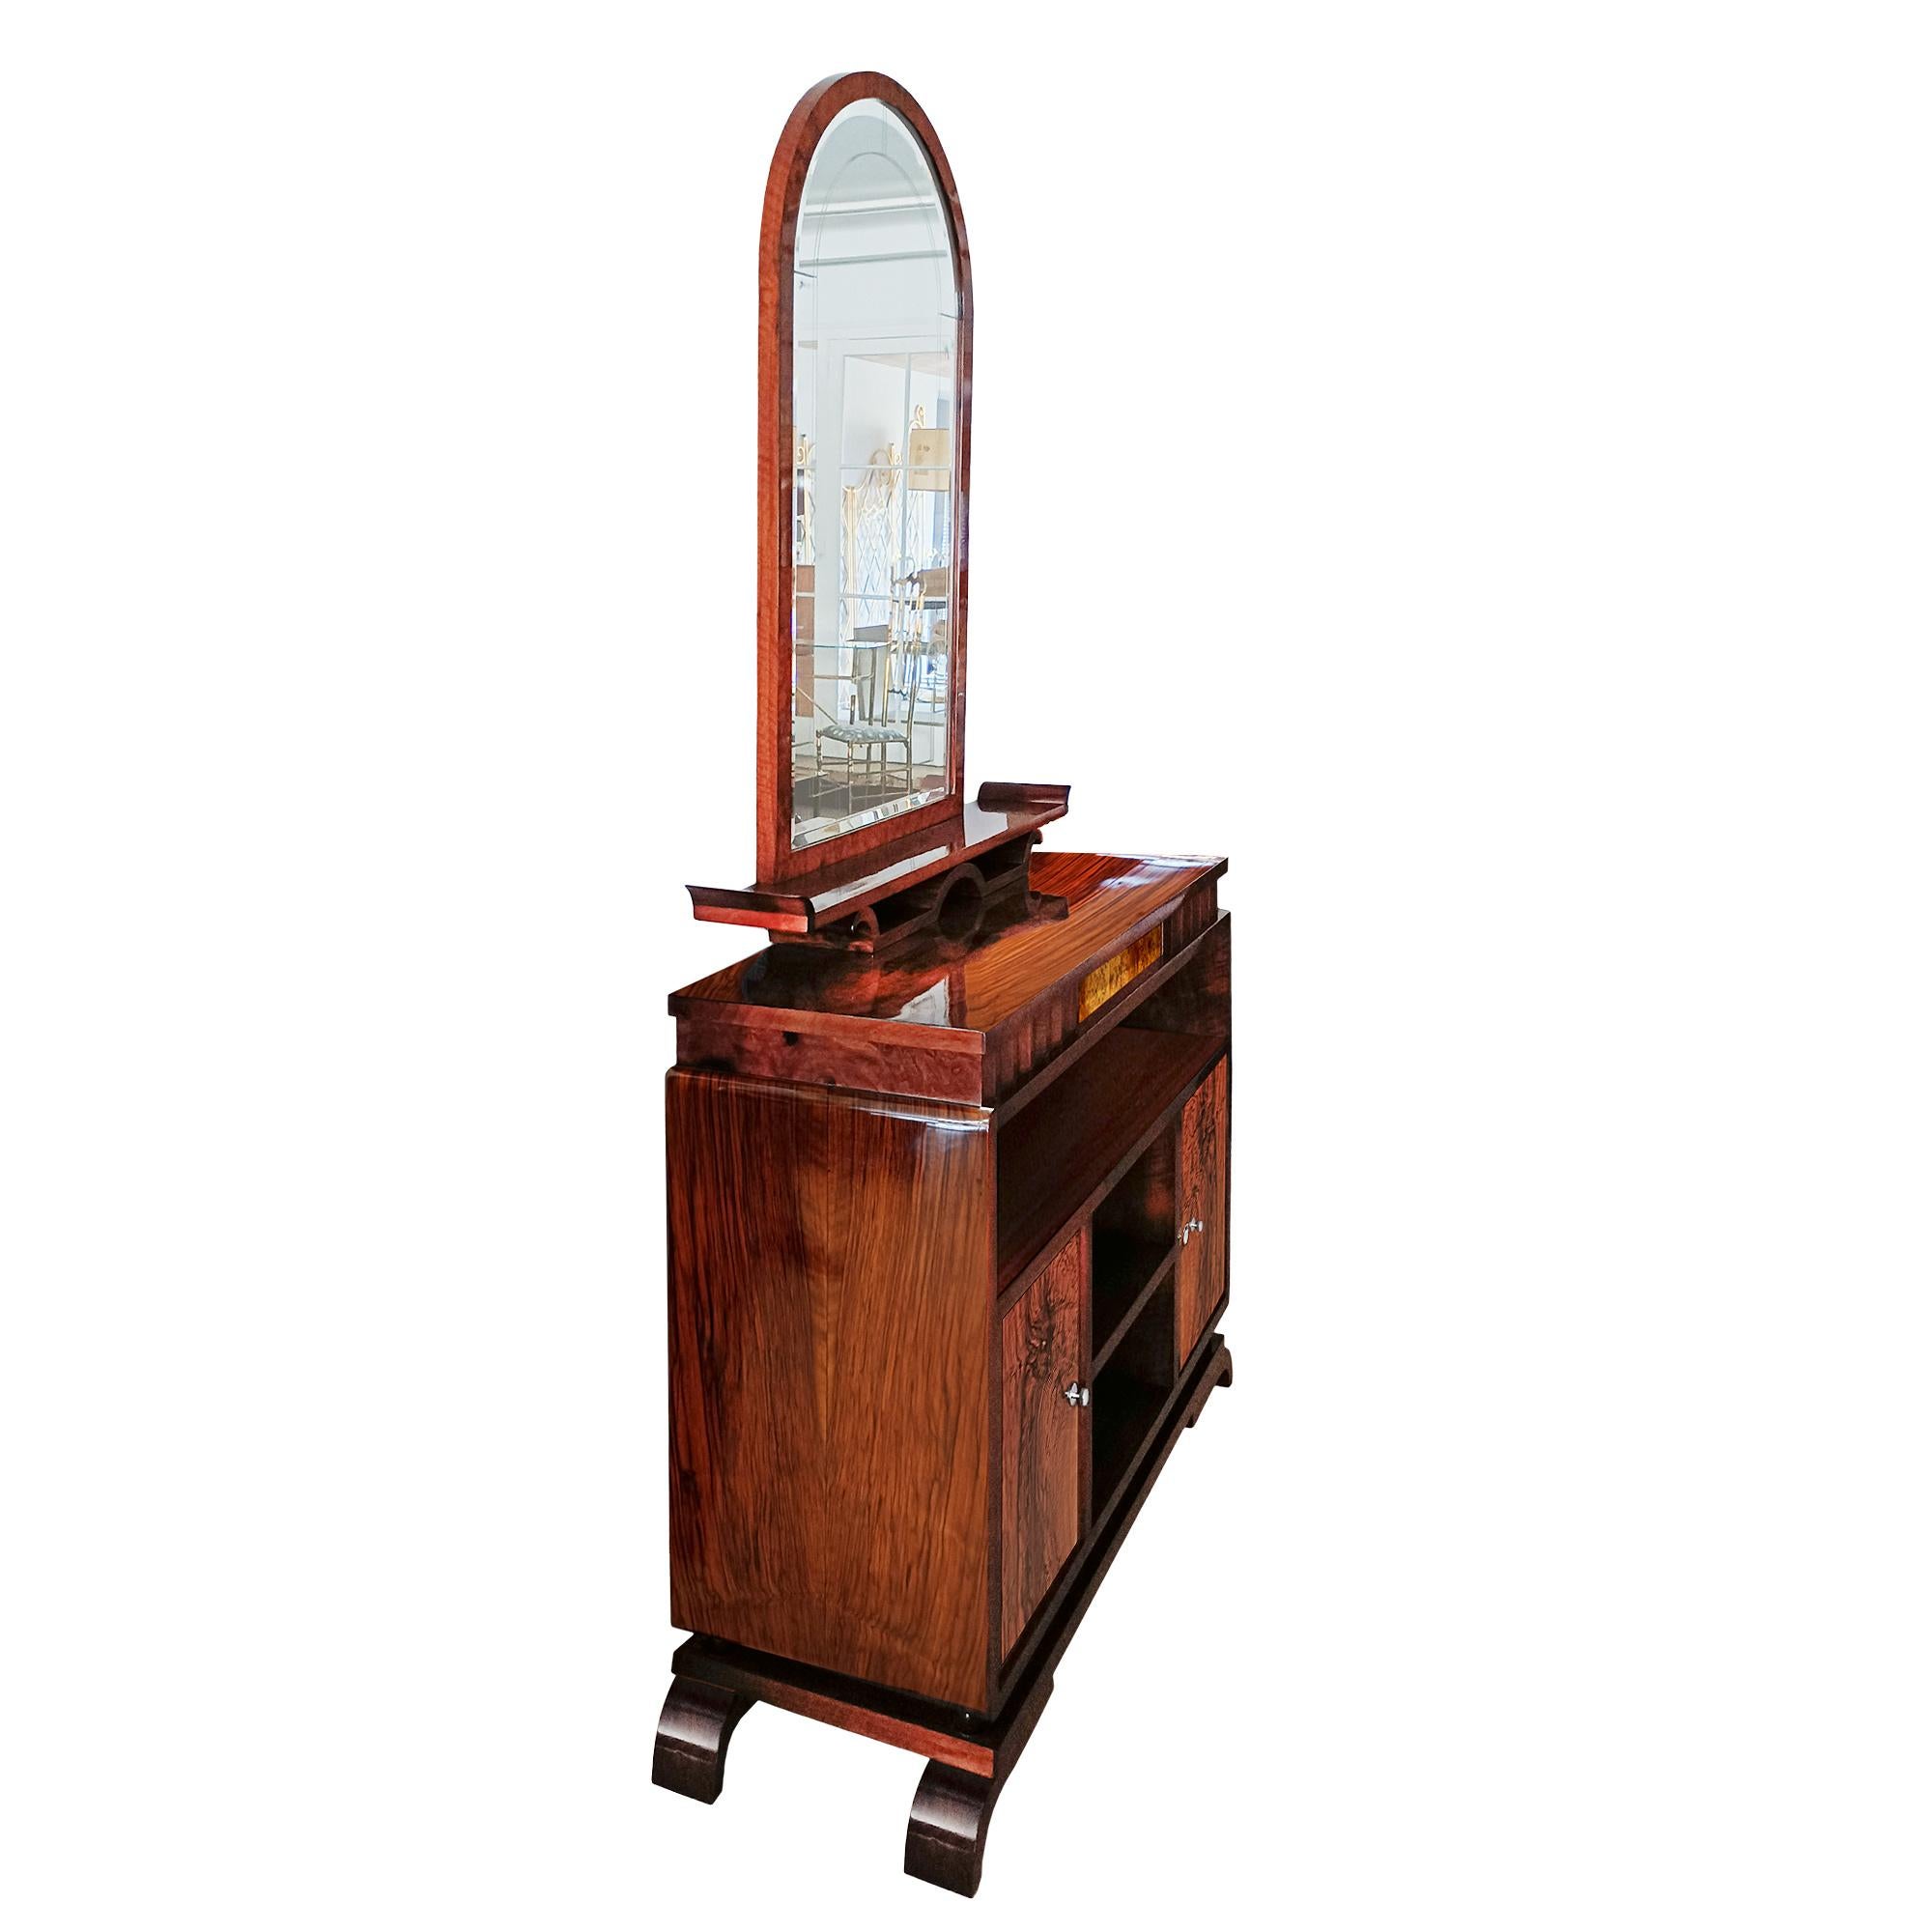 Art Deco auxiliary or entrance unit with walnut and burr walnut veneers, consisting in a cabinet with two doors (one concealing a mini-bar), topped by an engraved bevelled mirror with a burr walnut frame, resting on a stylised shelf. Nickel-plated